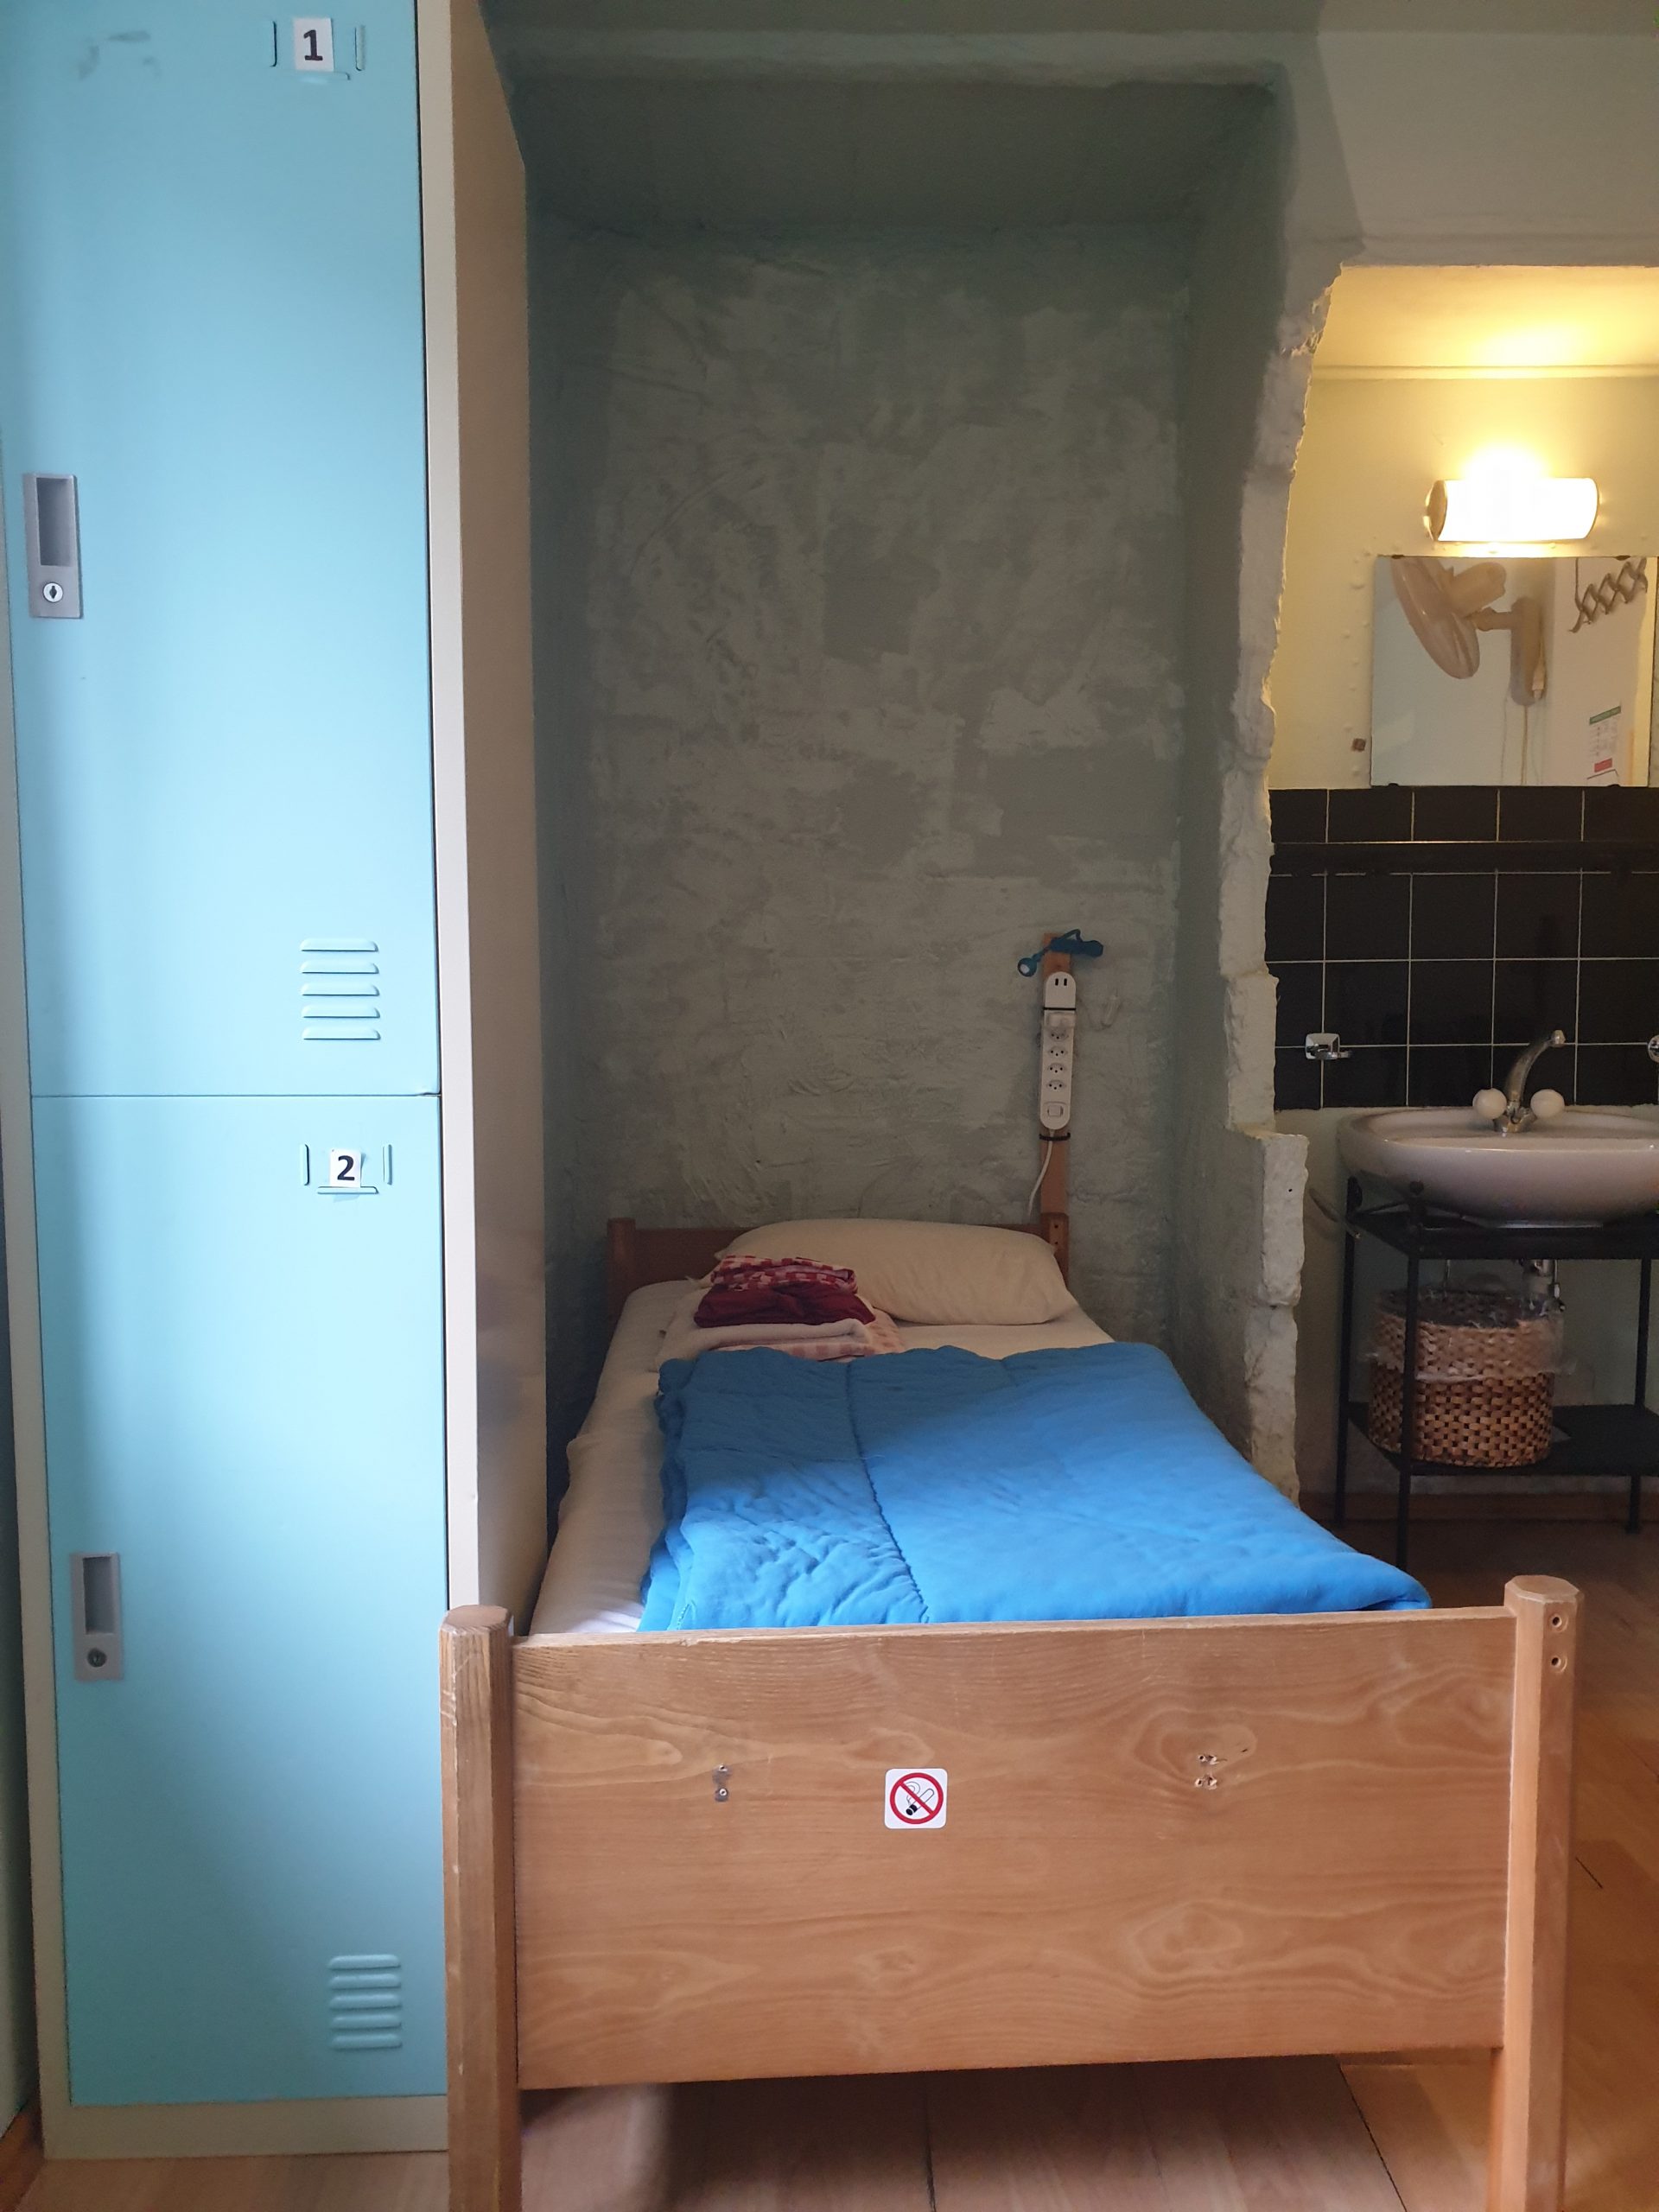 2-bed female 40/50